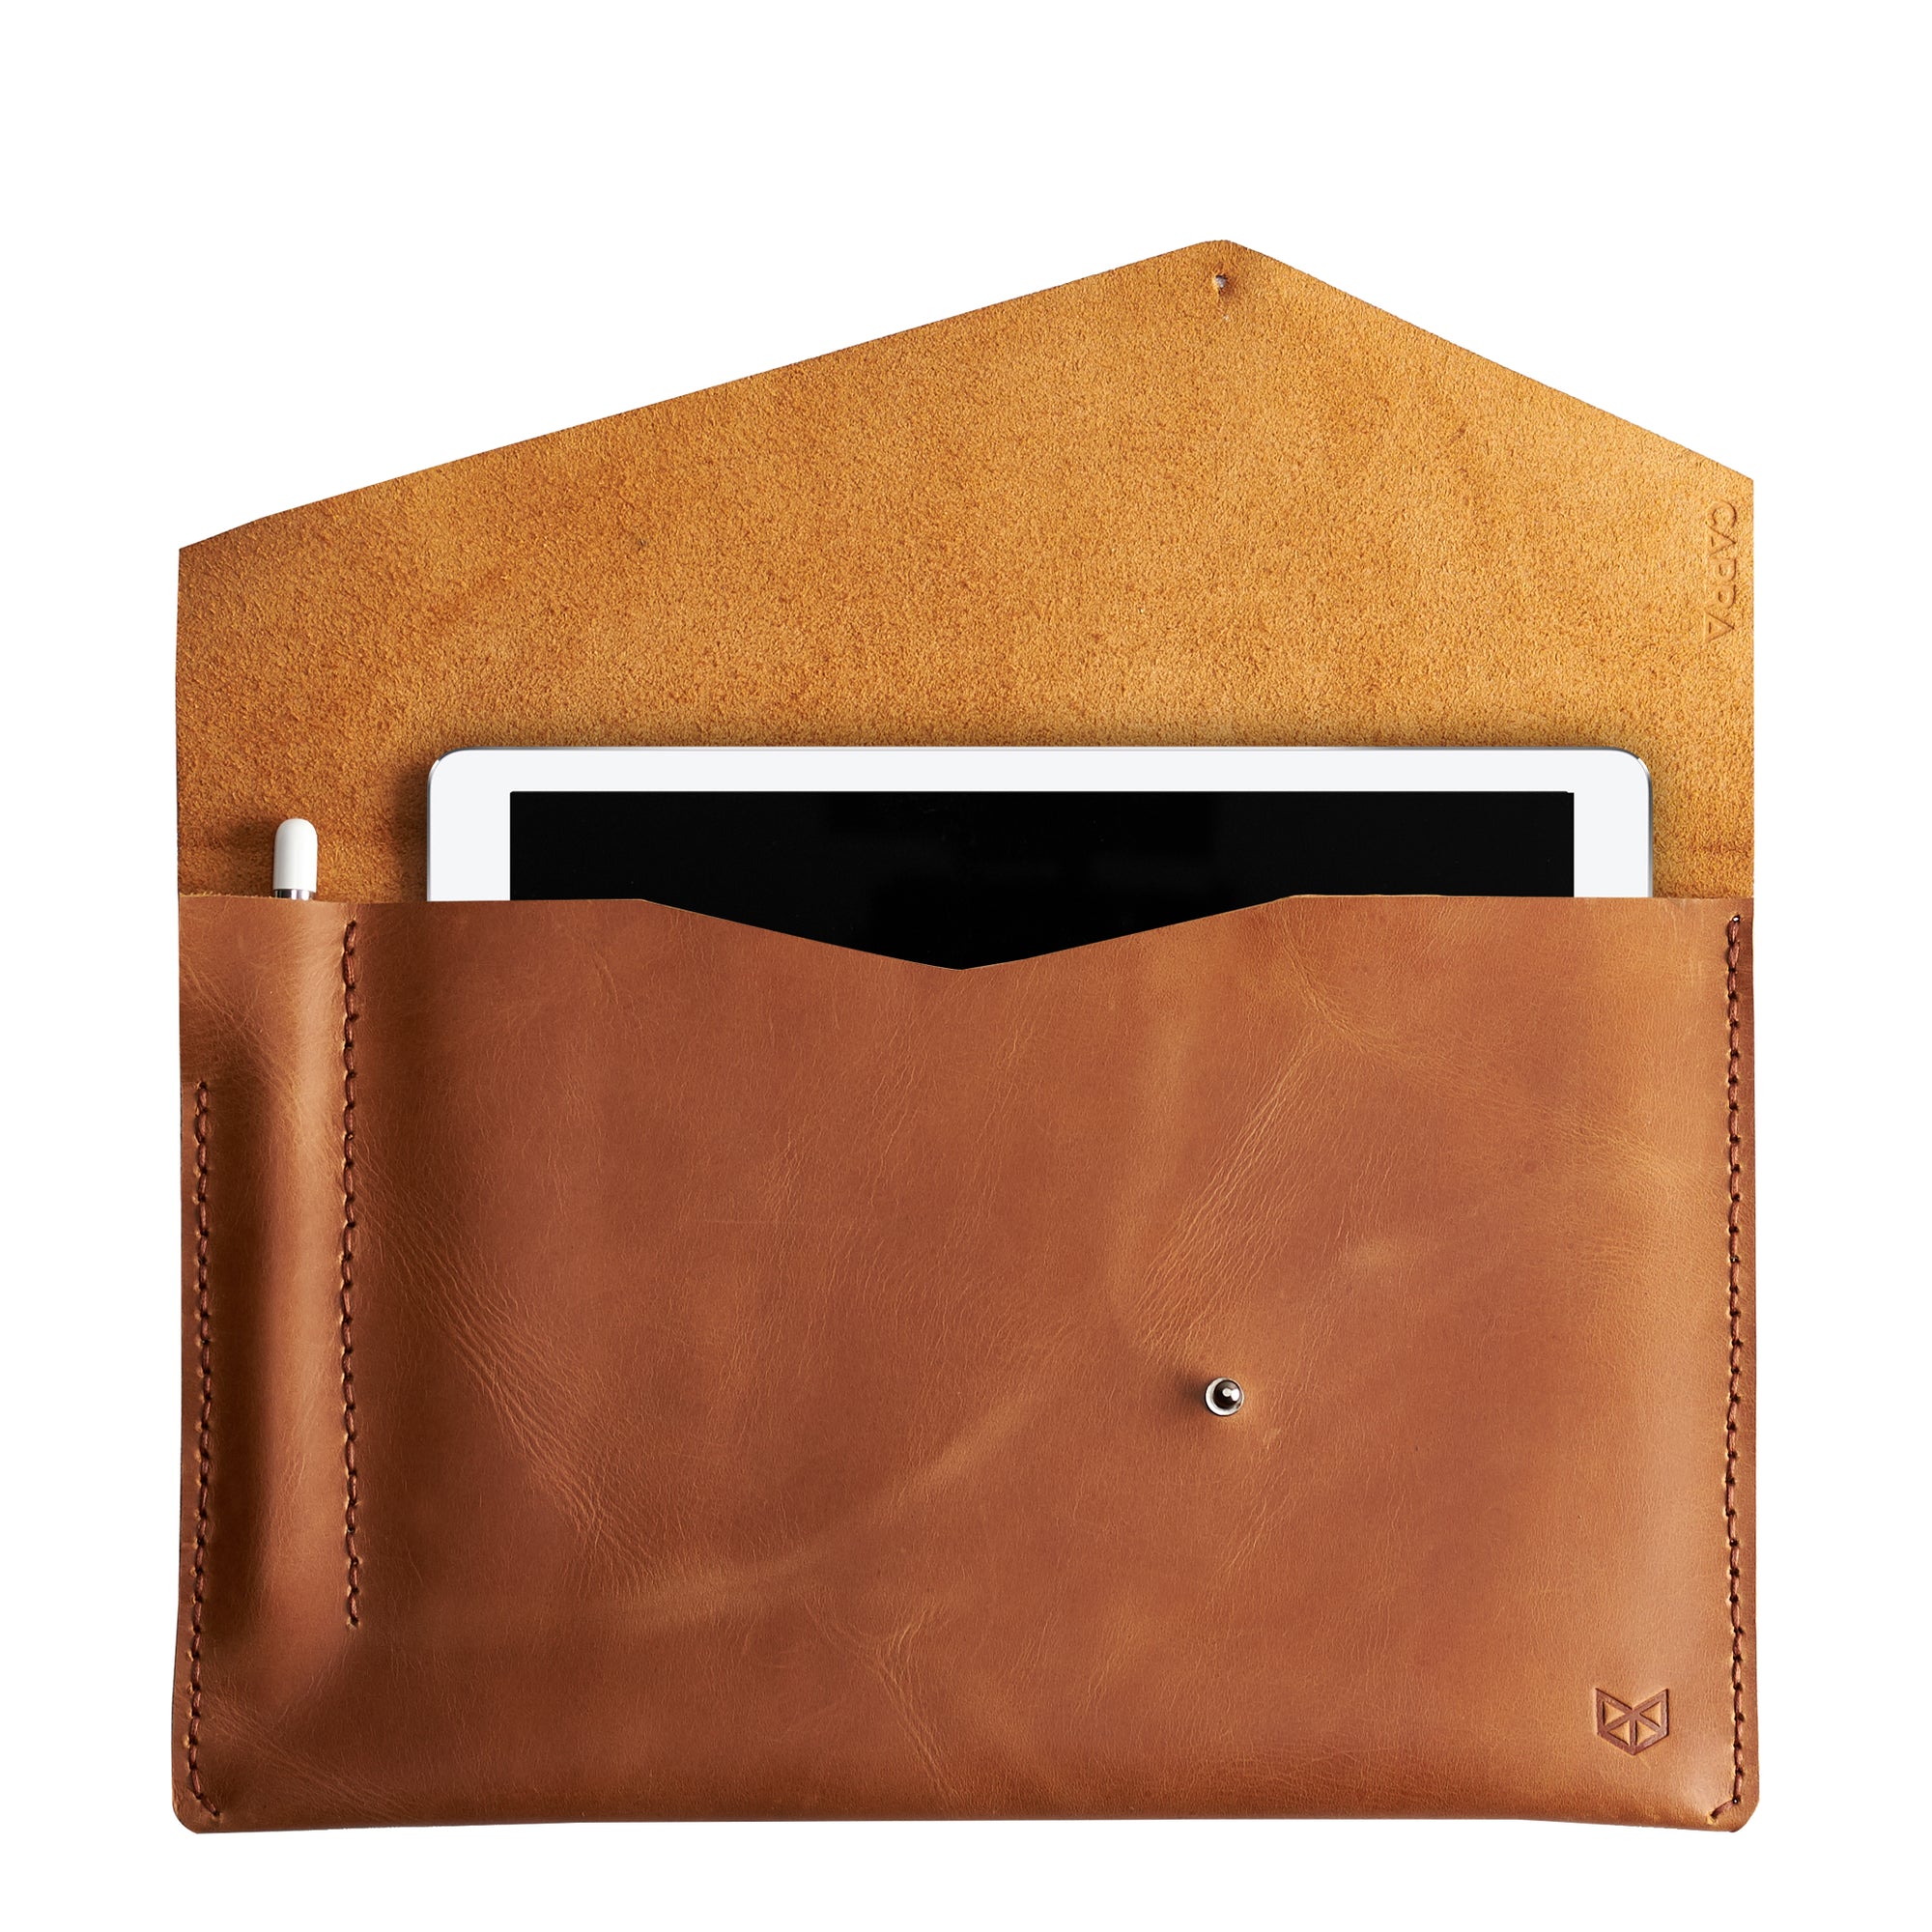 Front View. iPad Sleeve. iPad Leather Case Tan With Apple Pencil Holder by Capra Leather